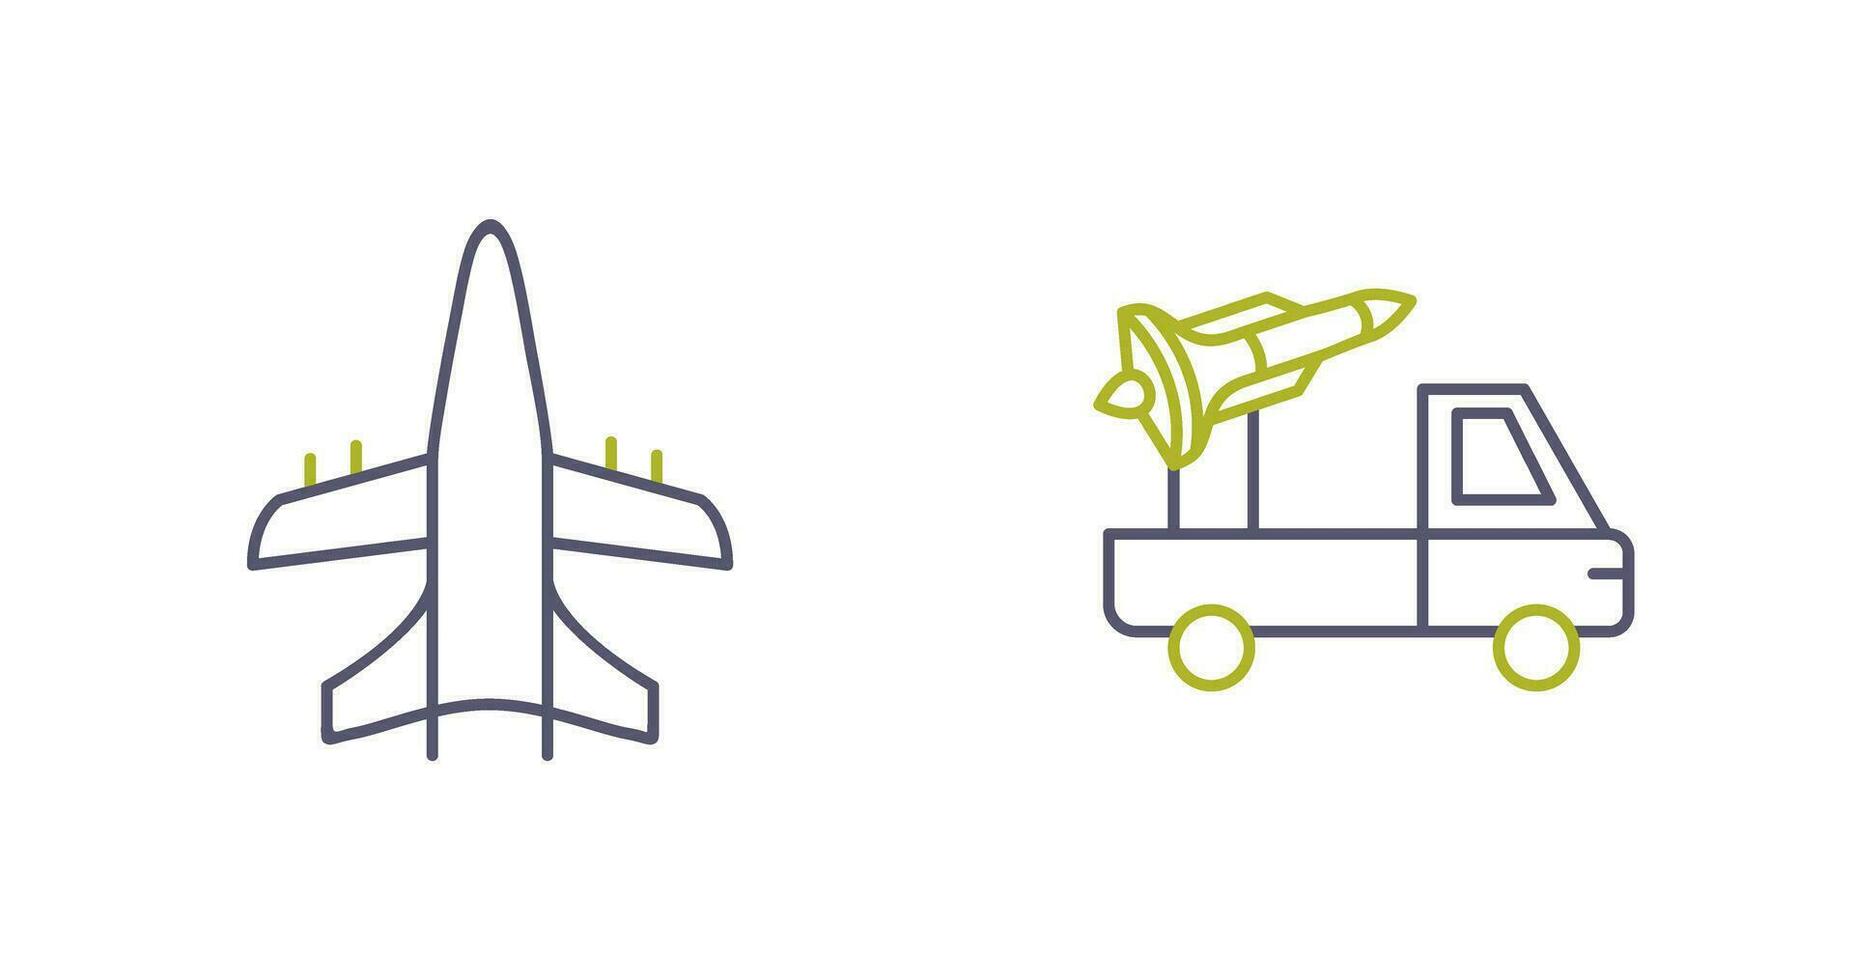 Military Plane and Missile Icon vector